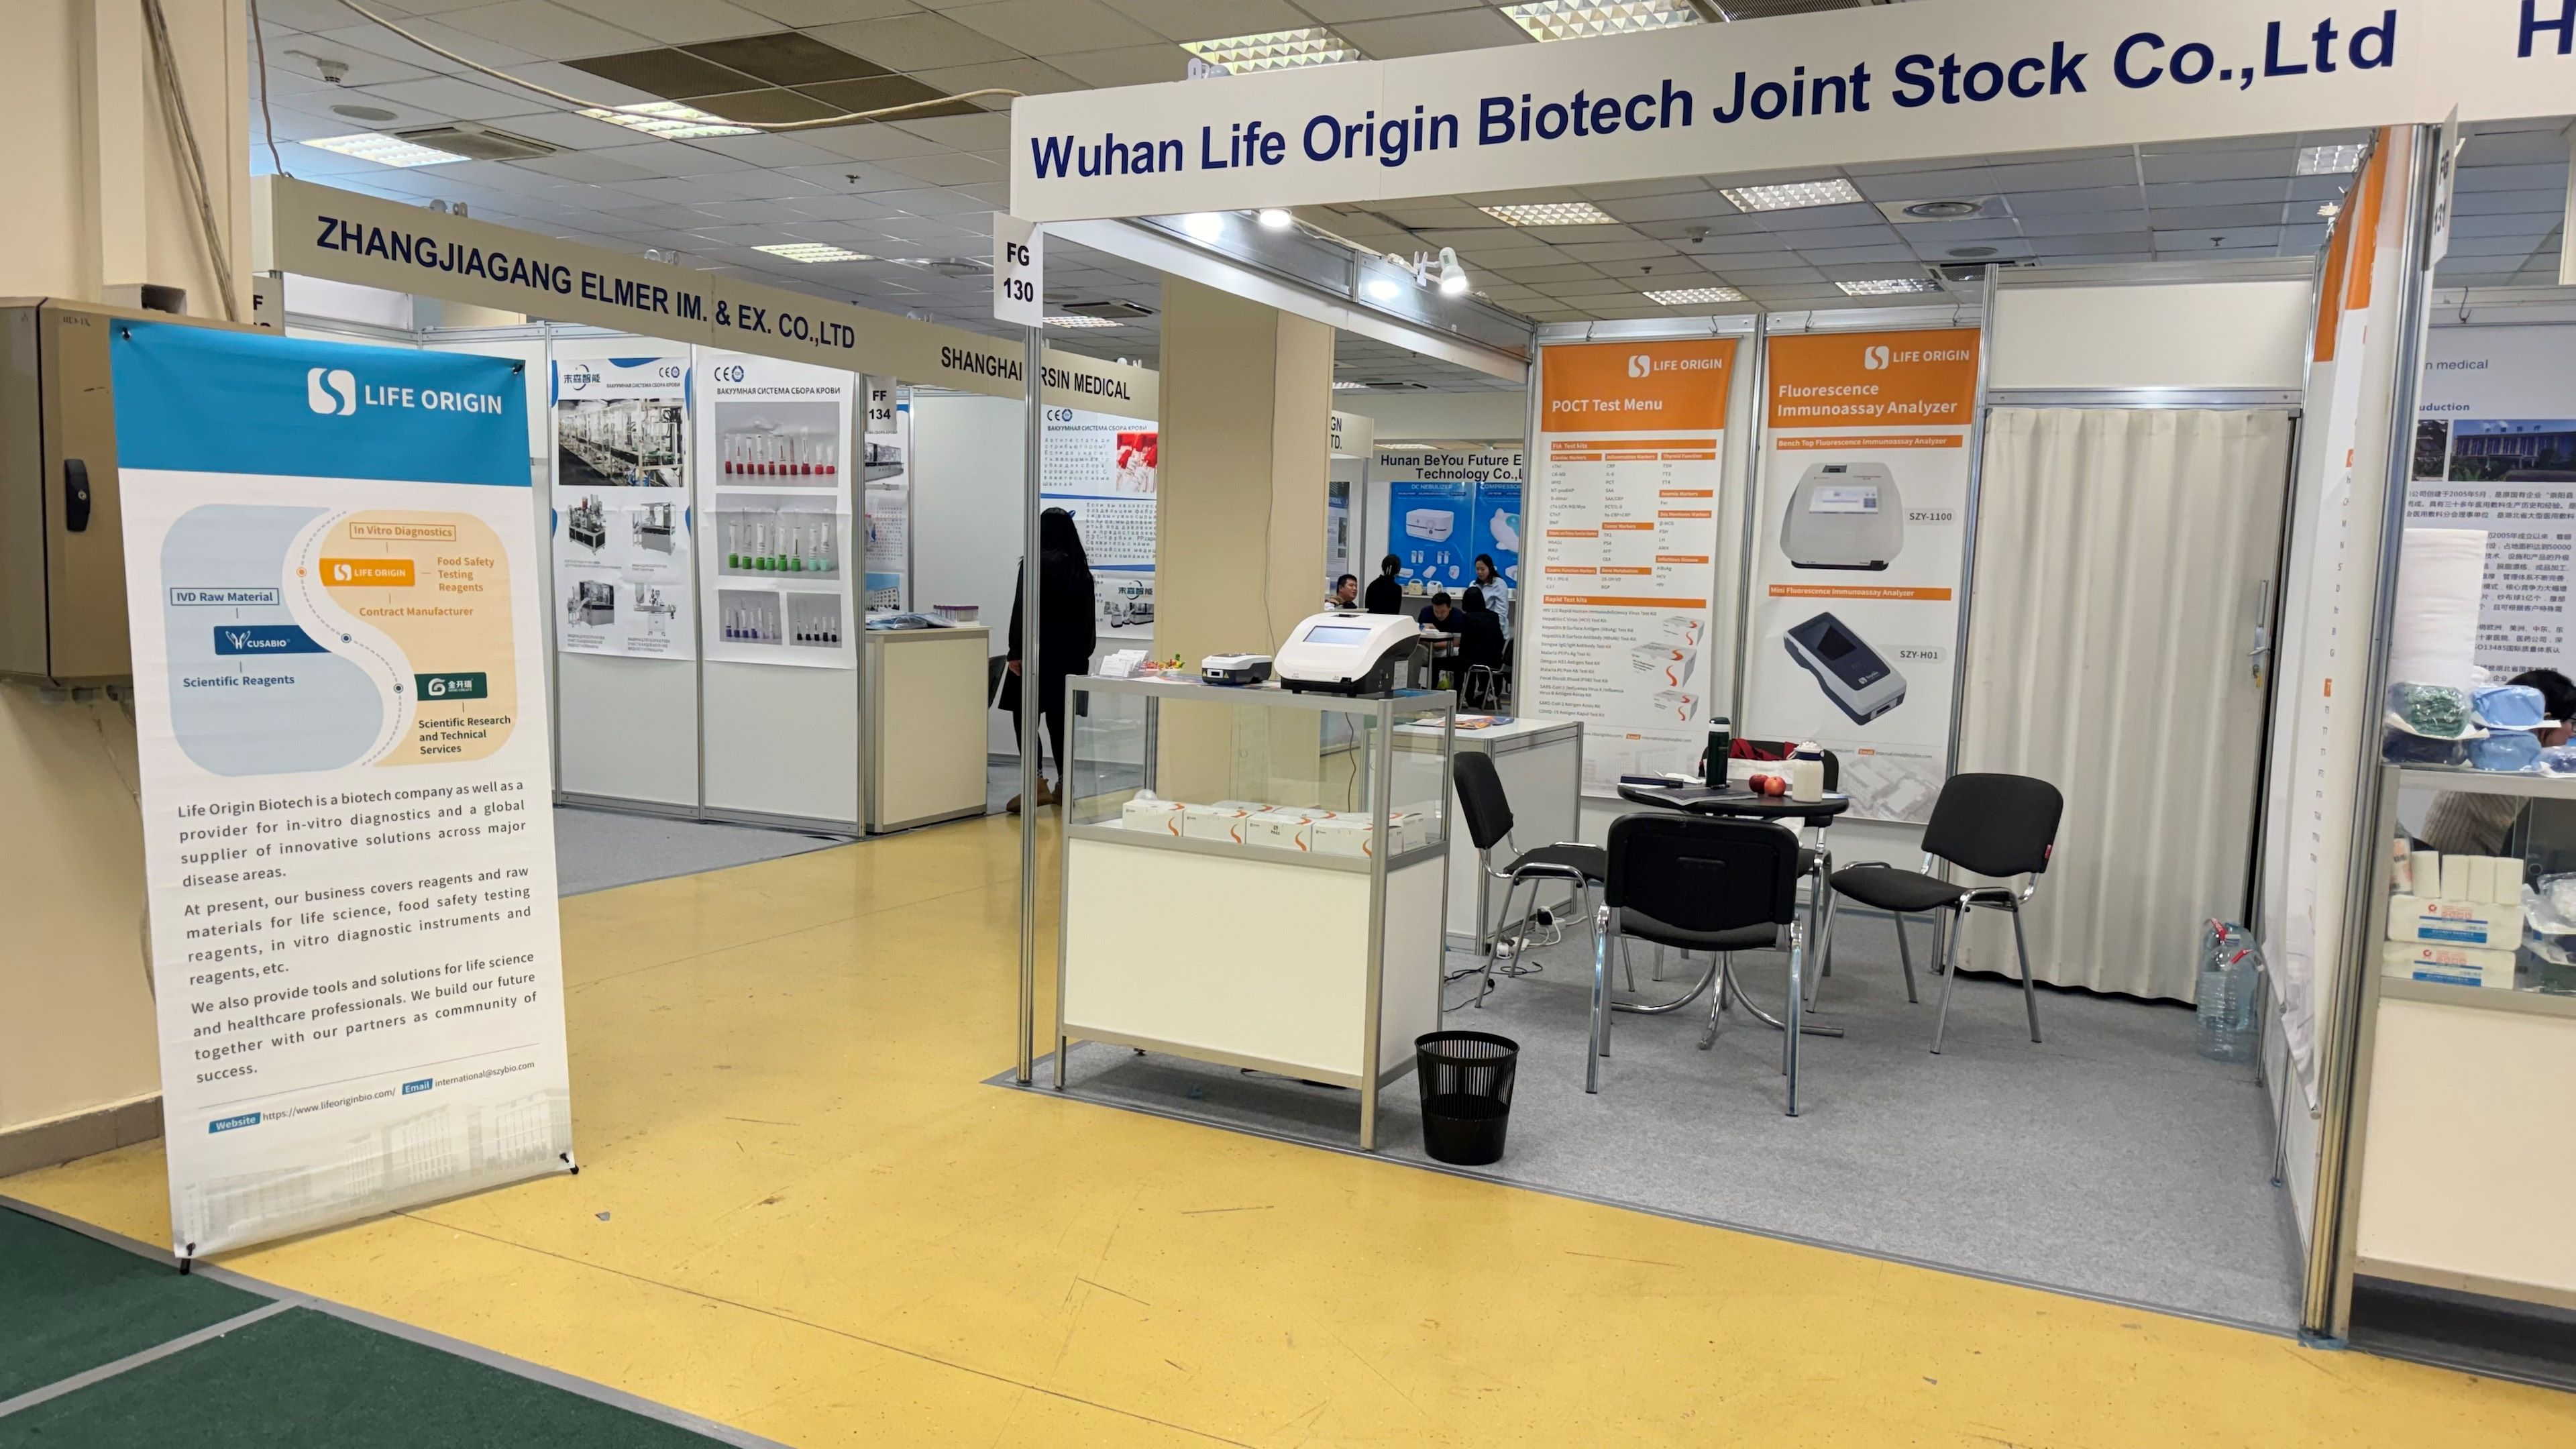 Exhibition Report | Life Origin Biotech made a stunning appearance at the ZDRAVOOKHRANENIYE 2023-Russian Health Care Week